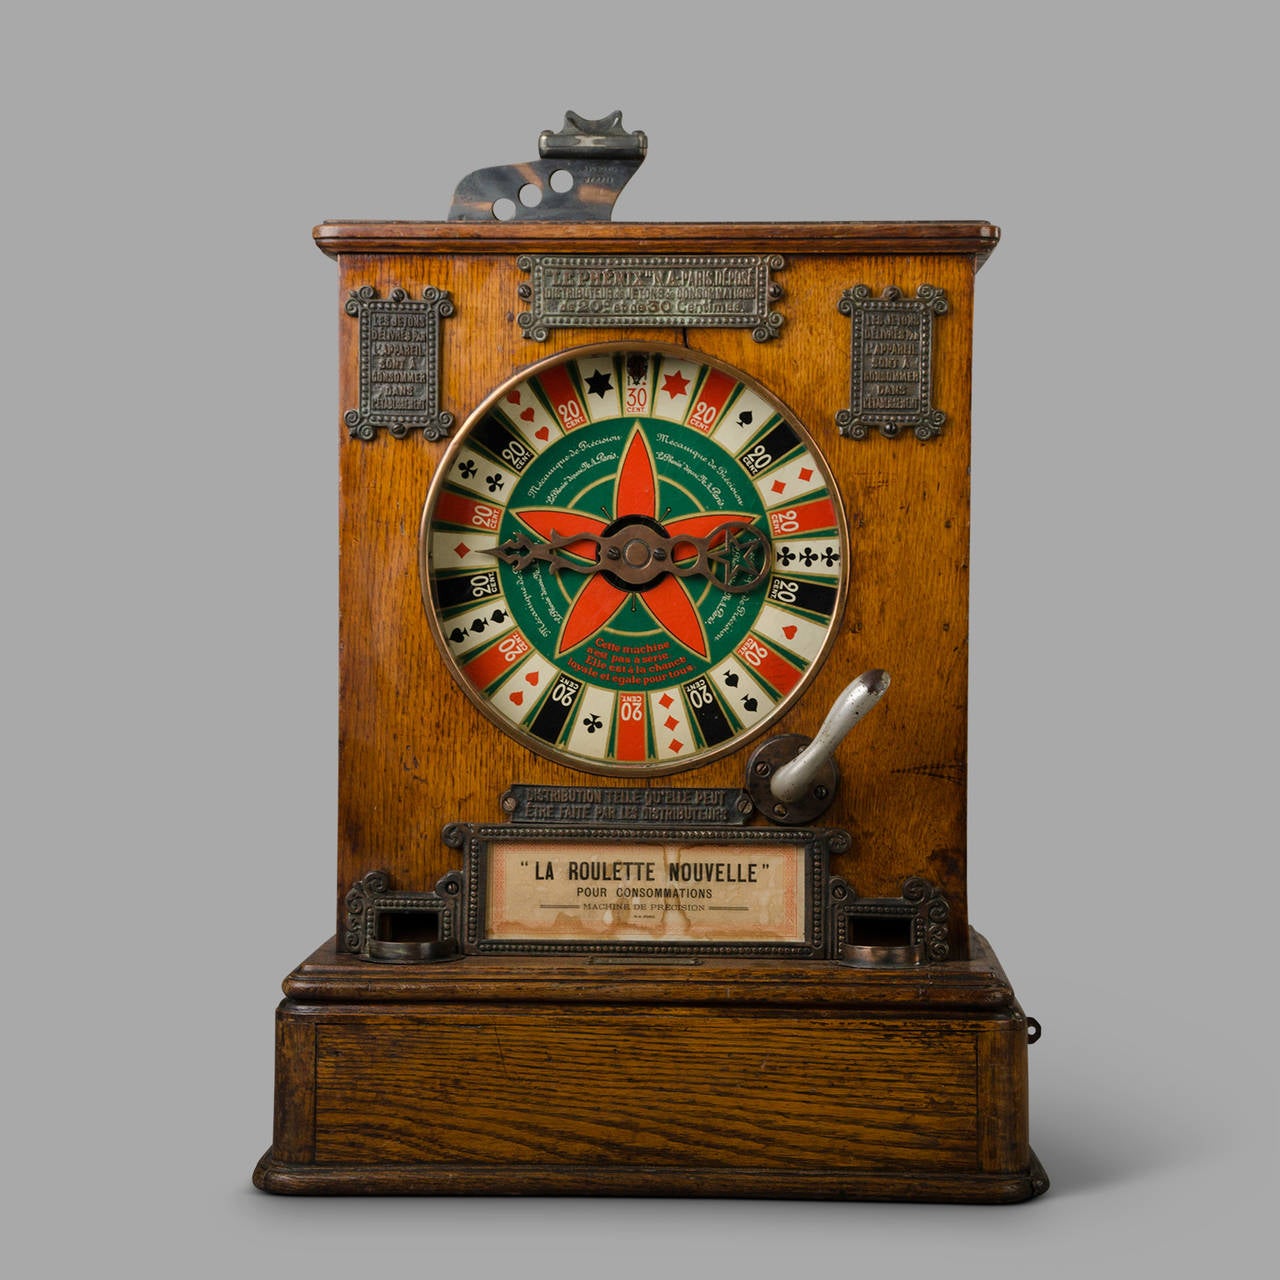 French 1906s slot machine manufactured by Nau and Registered in Paris: 'La Roulette Nouvelle' for consumers, precision machine.

In working order, originals drinks game winning tokens provided. Brass tokens for 30cts and aluminum one's for 20cts